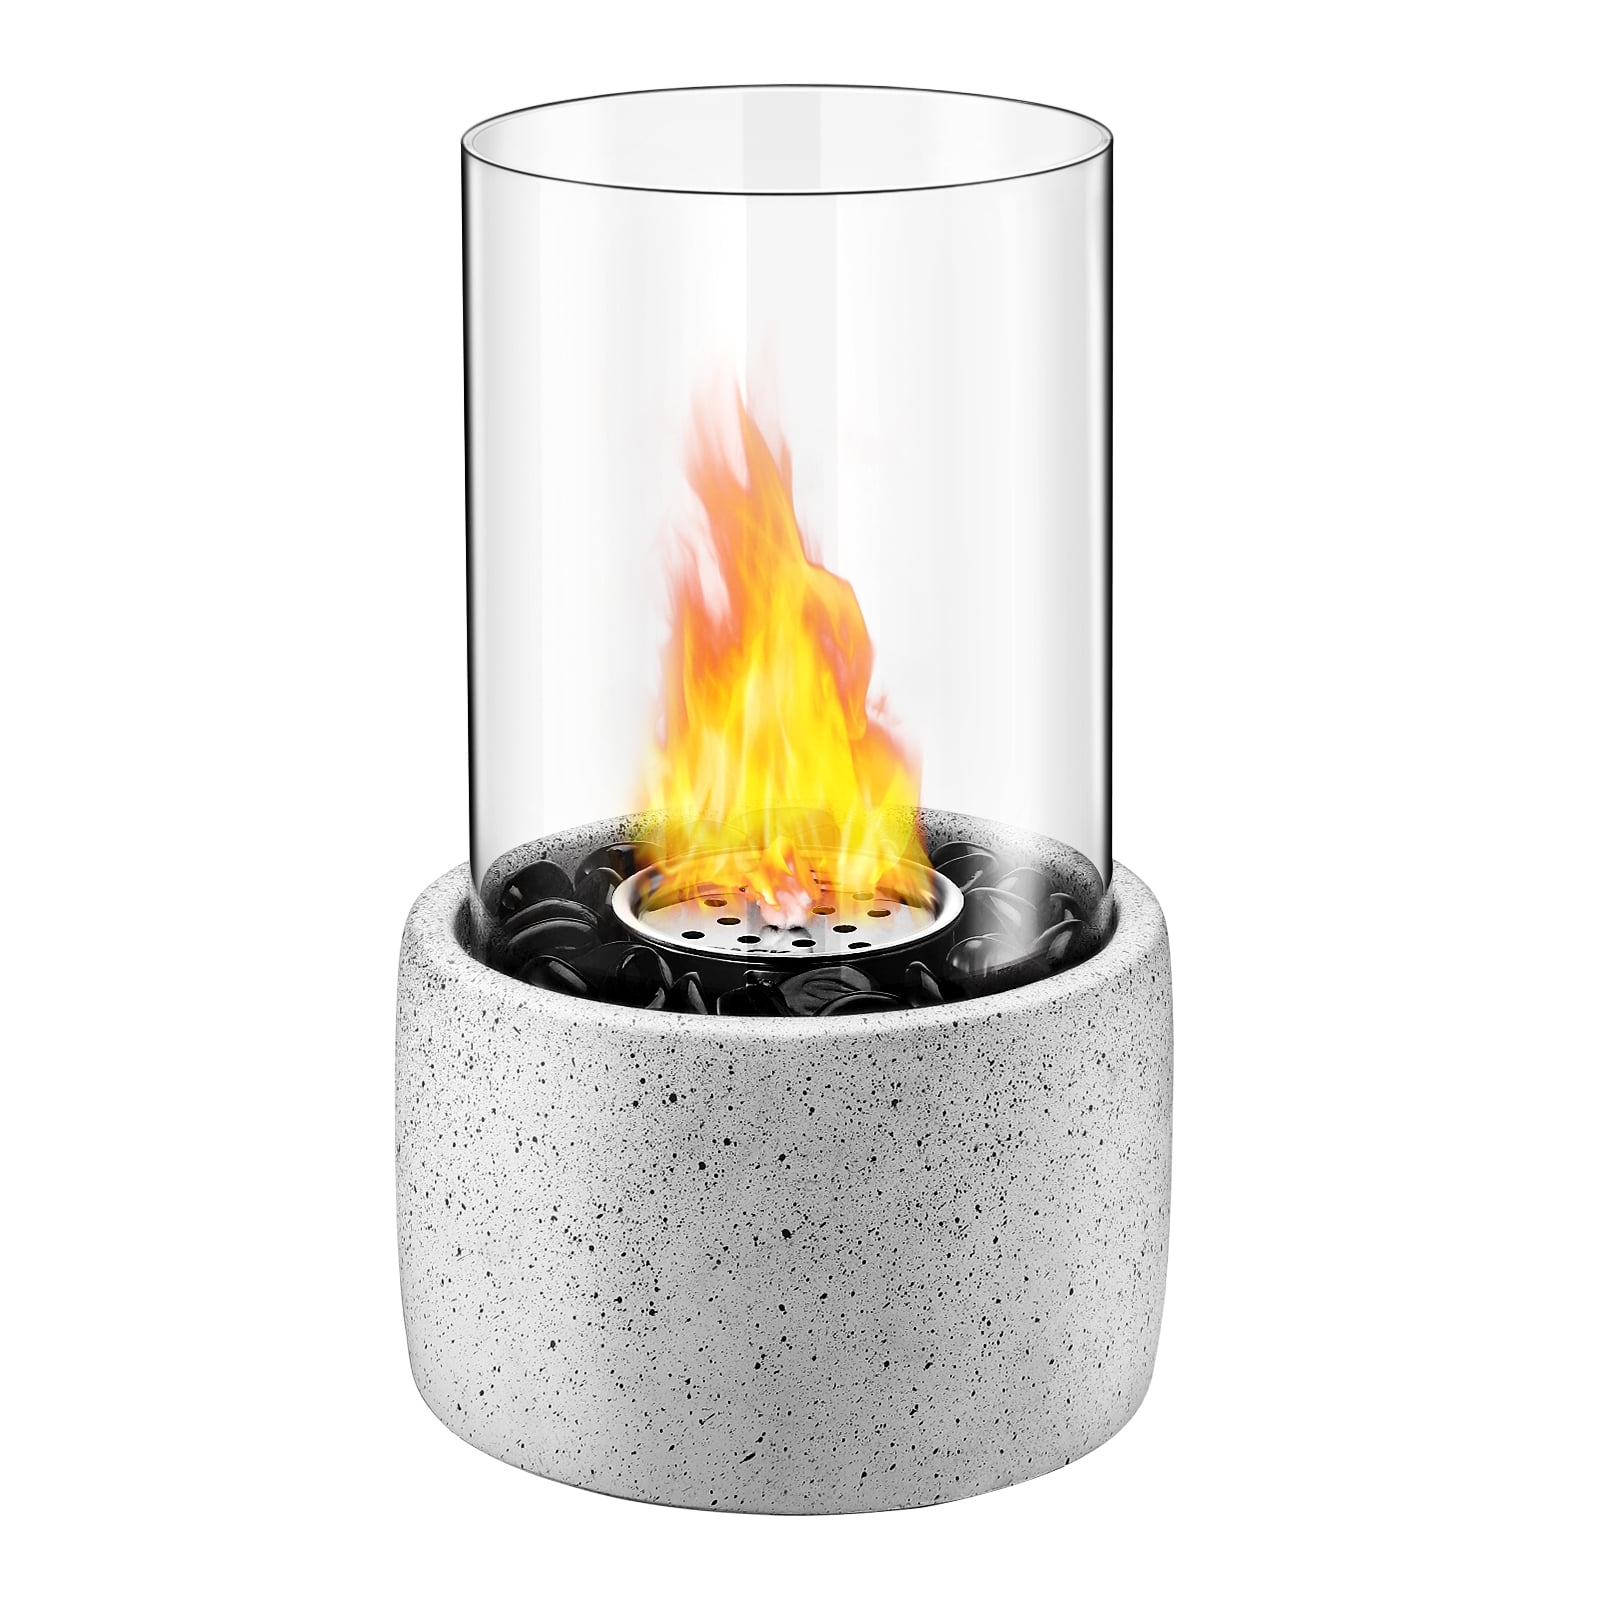 Tacklife Tabletop Fire Pit, What Kind Of Glass Can You Use In A Fire Pit